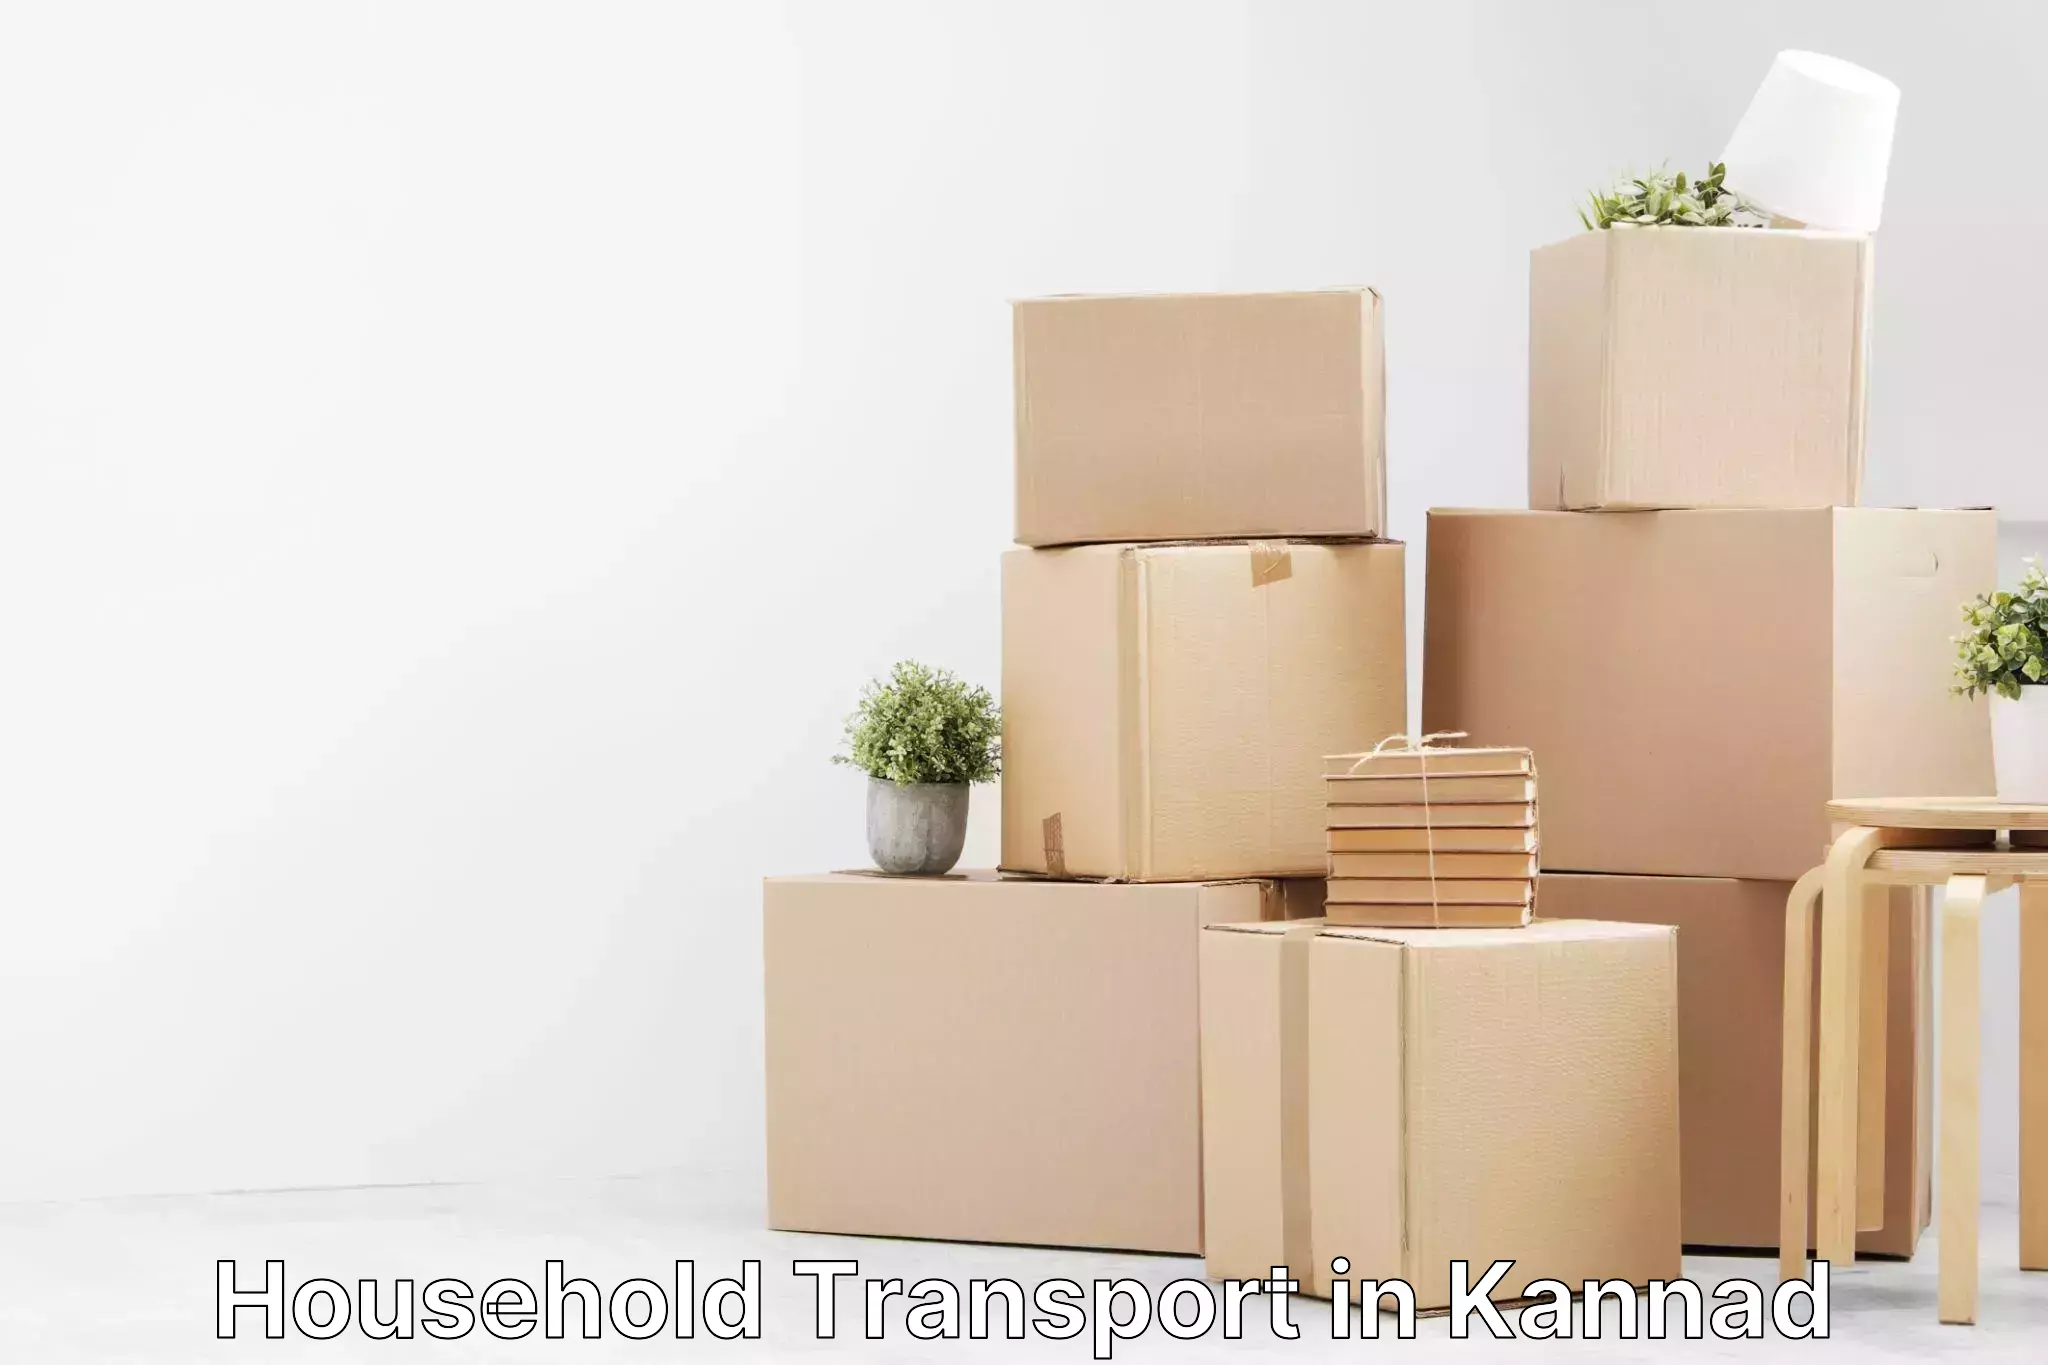 High-quality moving services in Kannad